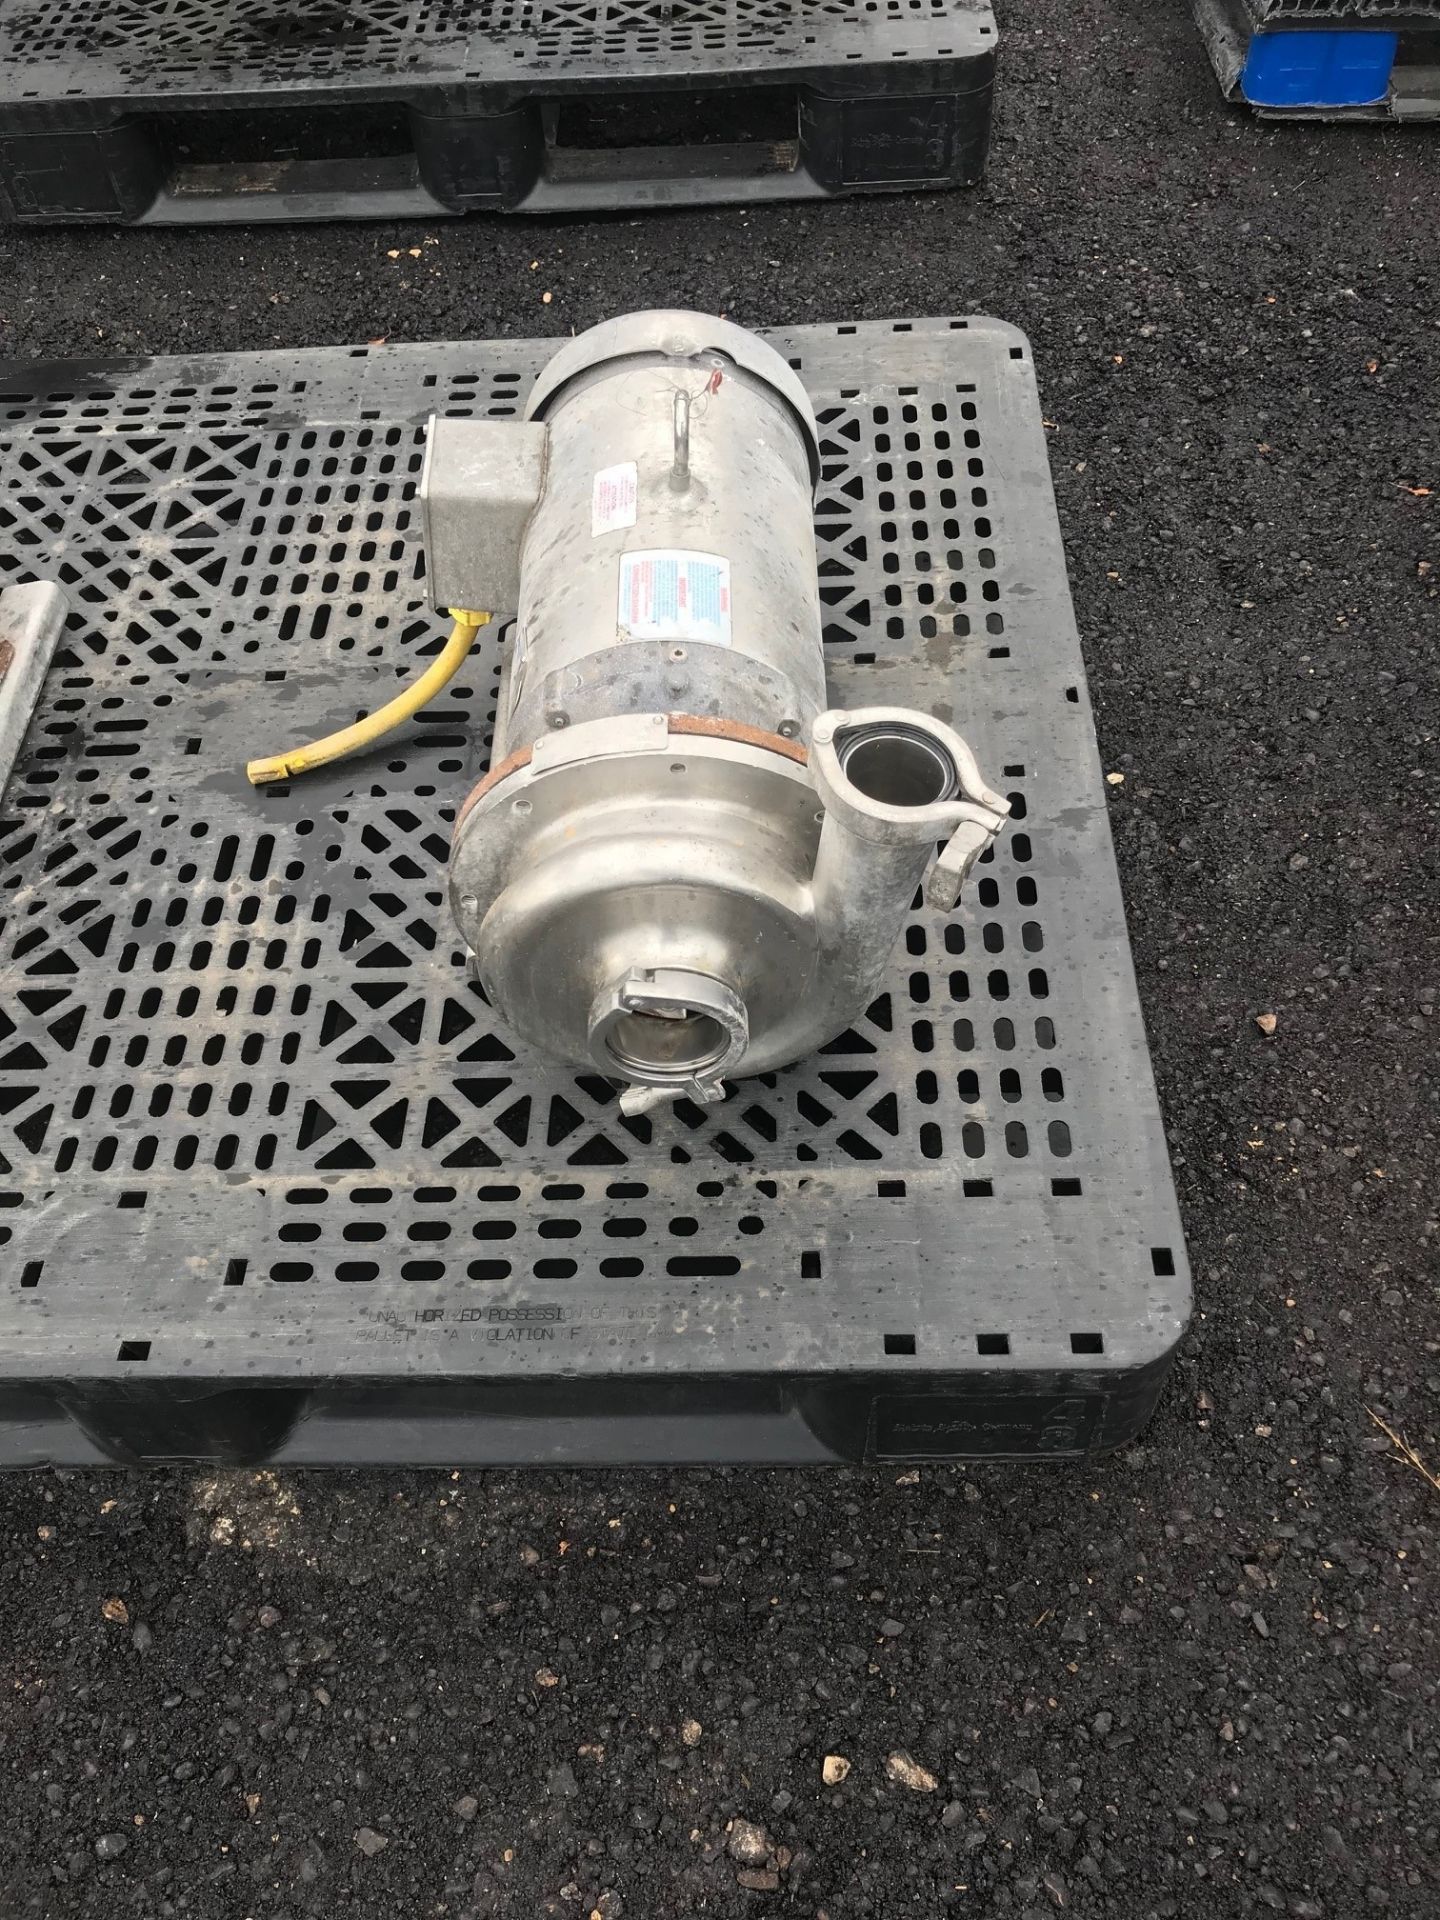 Ampco 5 h p Centrifugal Pump with S/S Motor (Loading Fee $50) (Located Union Grove, WI) - Image 2 of 3